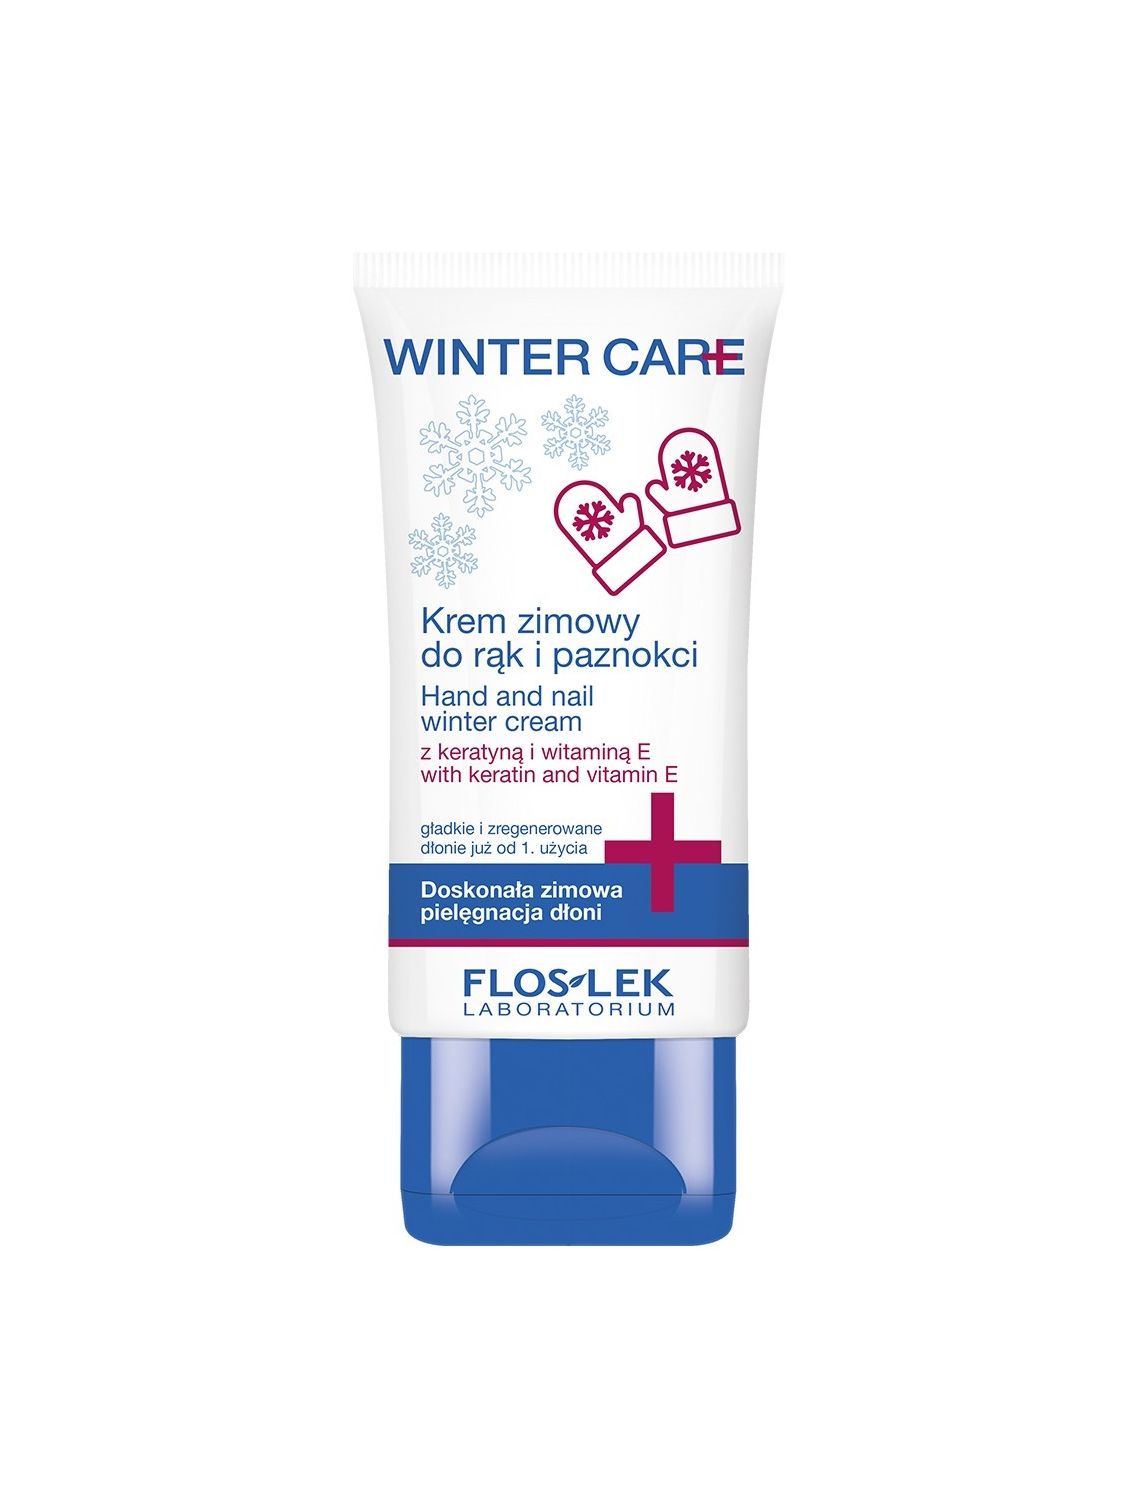 WINTER CARE Hand and nail winter cream with keratin and vitamin E - 50 ml - Floslek